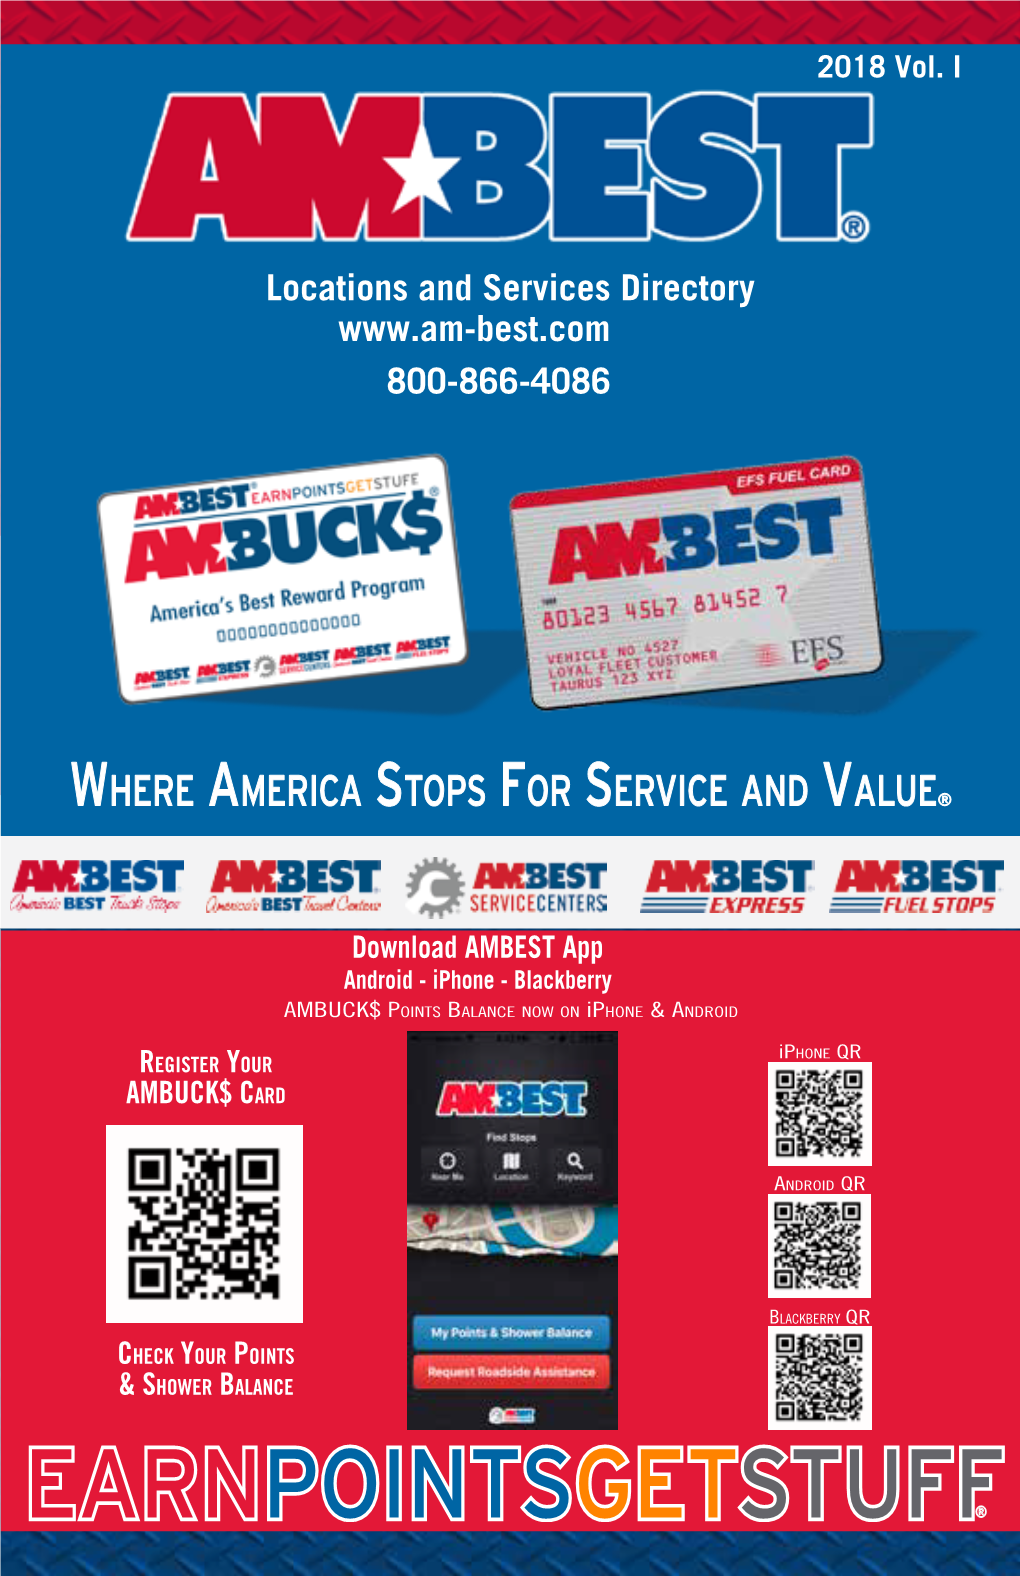 Where America Stops for Service and Value®